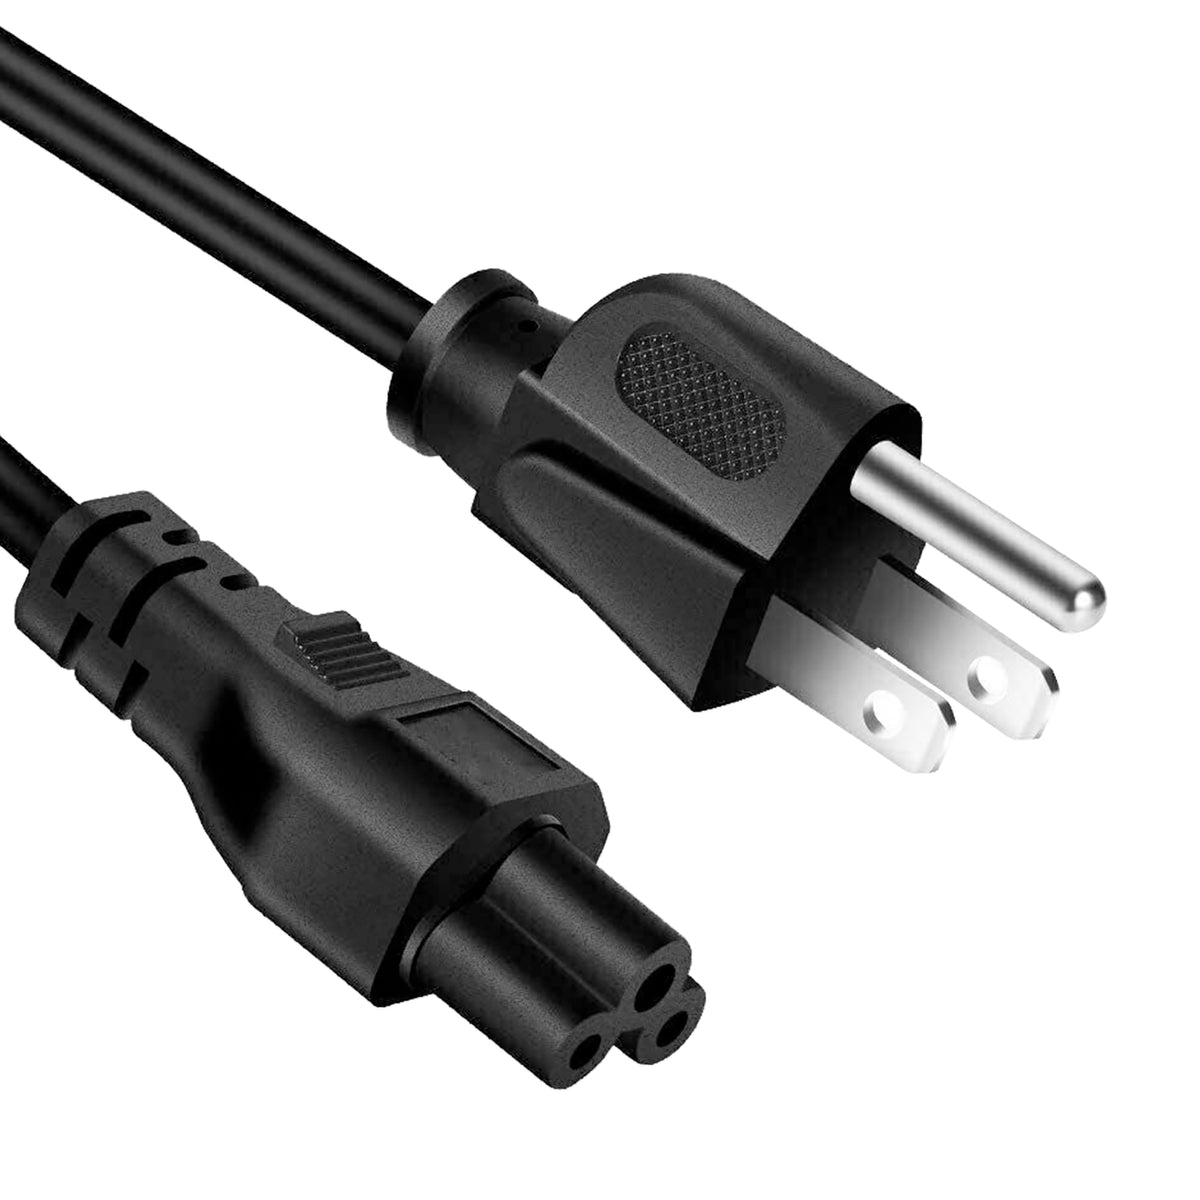 5 Core Extra Long 6ft 3 Prong Non-Polarized AC Wall Power Cable Cord for HP Dell Samsung Sony Asus Acer Toshiba Laptop Charger